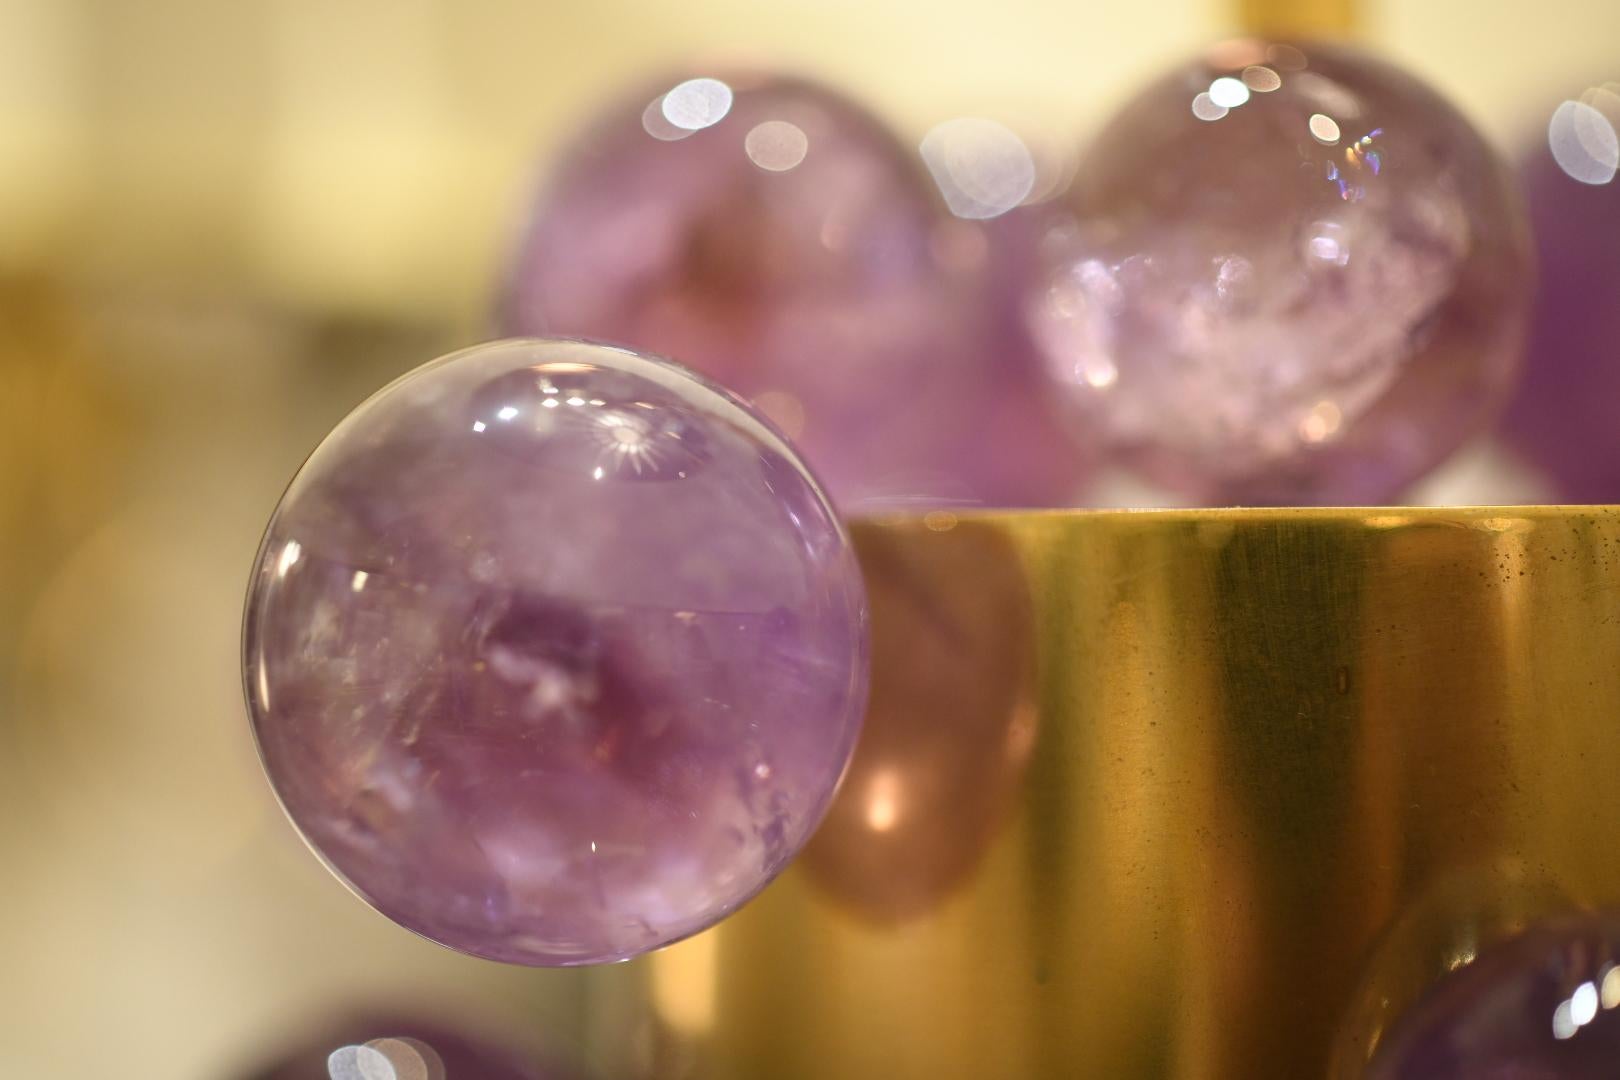 Contemporary Amethyst Rock Crystal Bubble Lamps by Phoenix